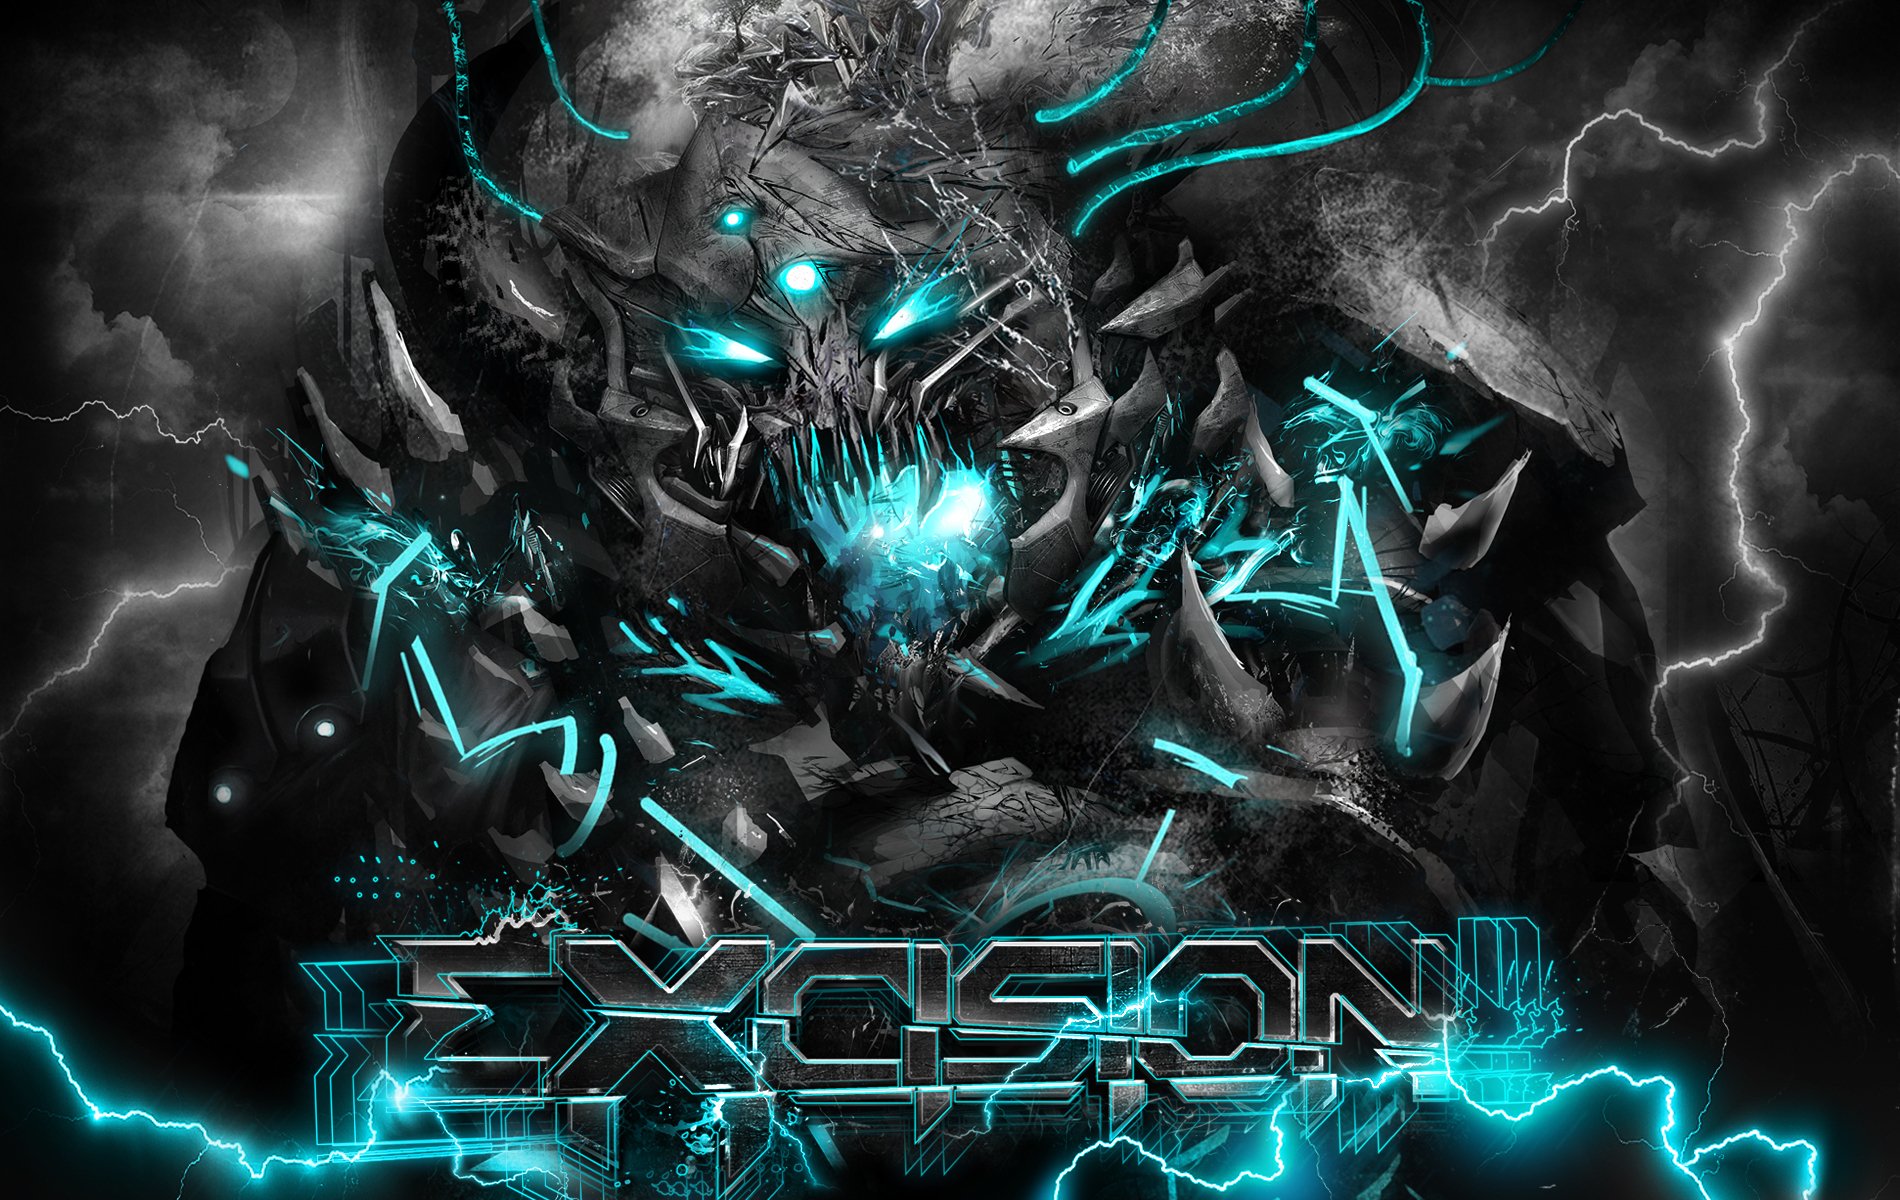 Excision Dubstep - HD Wallpaper 